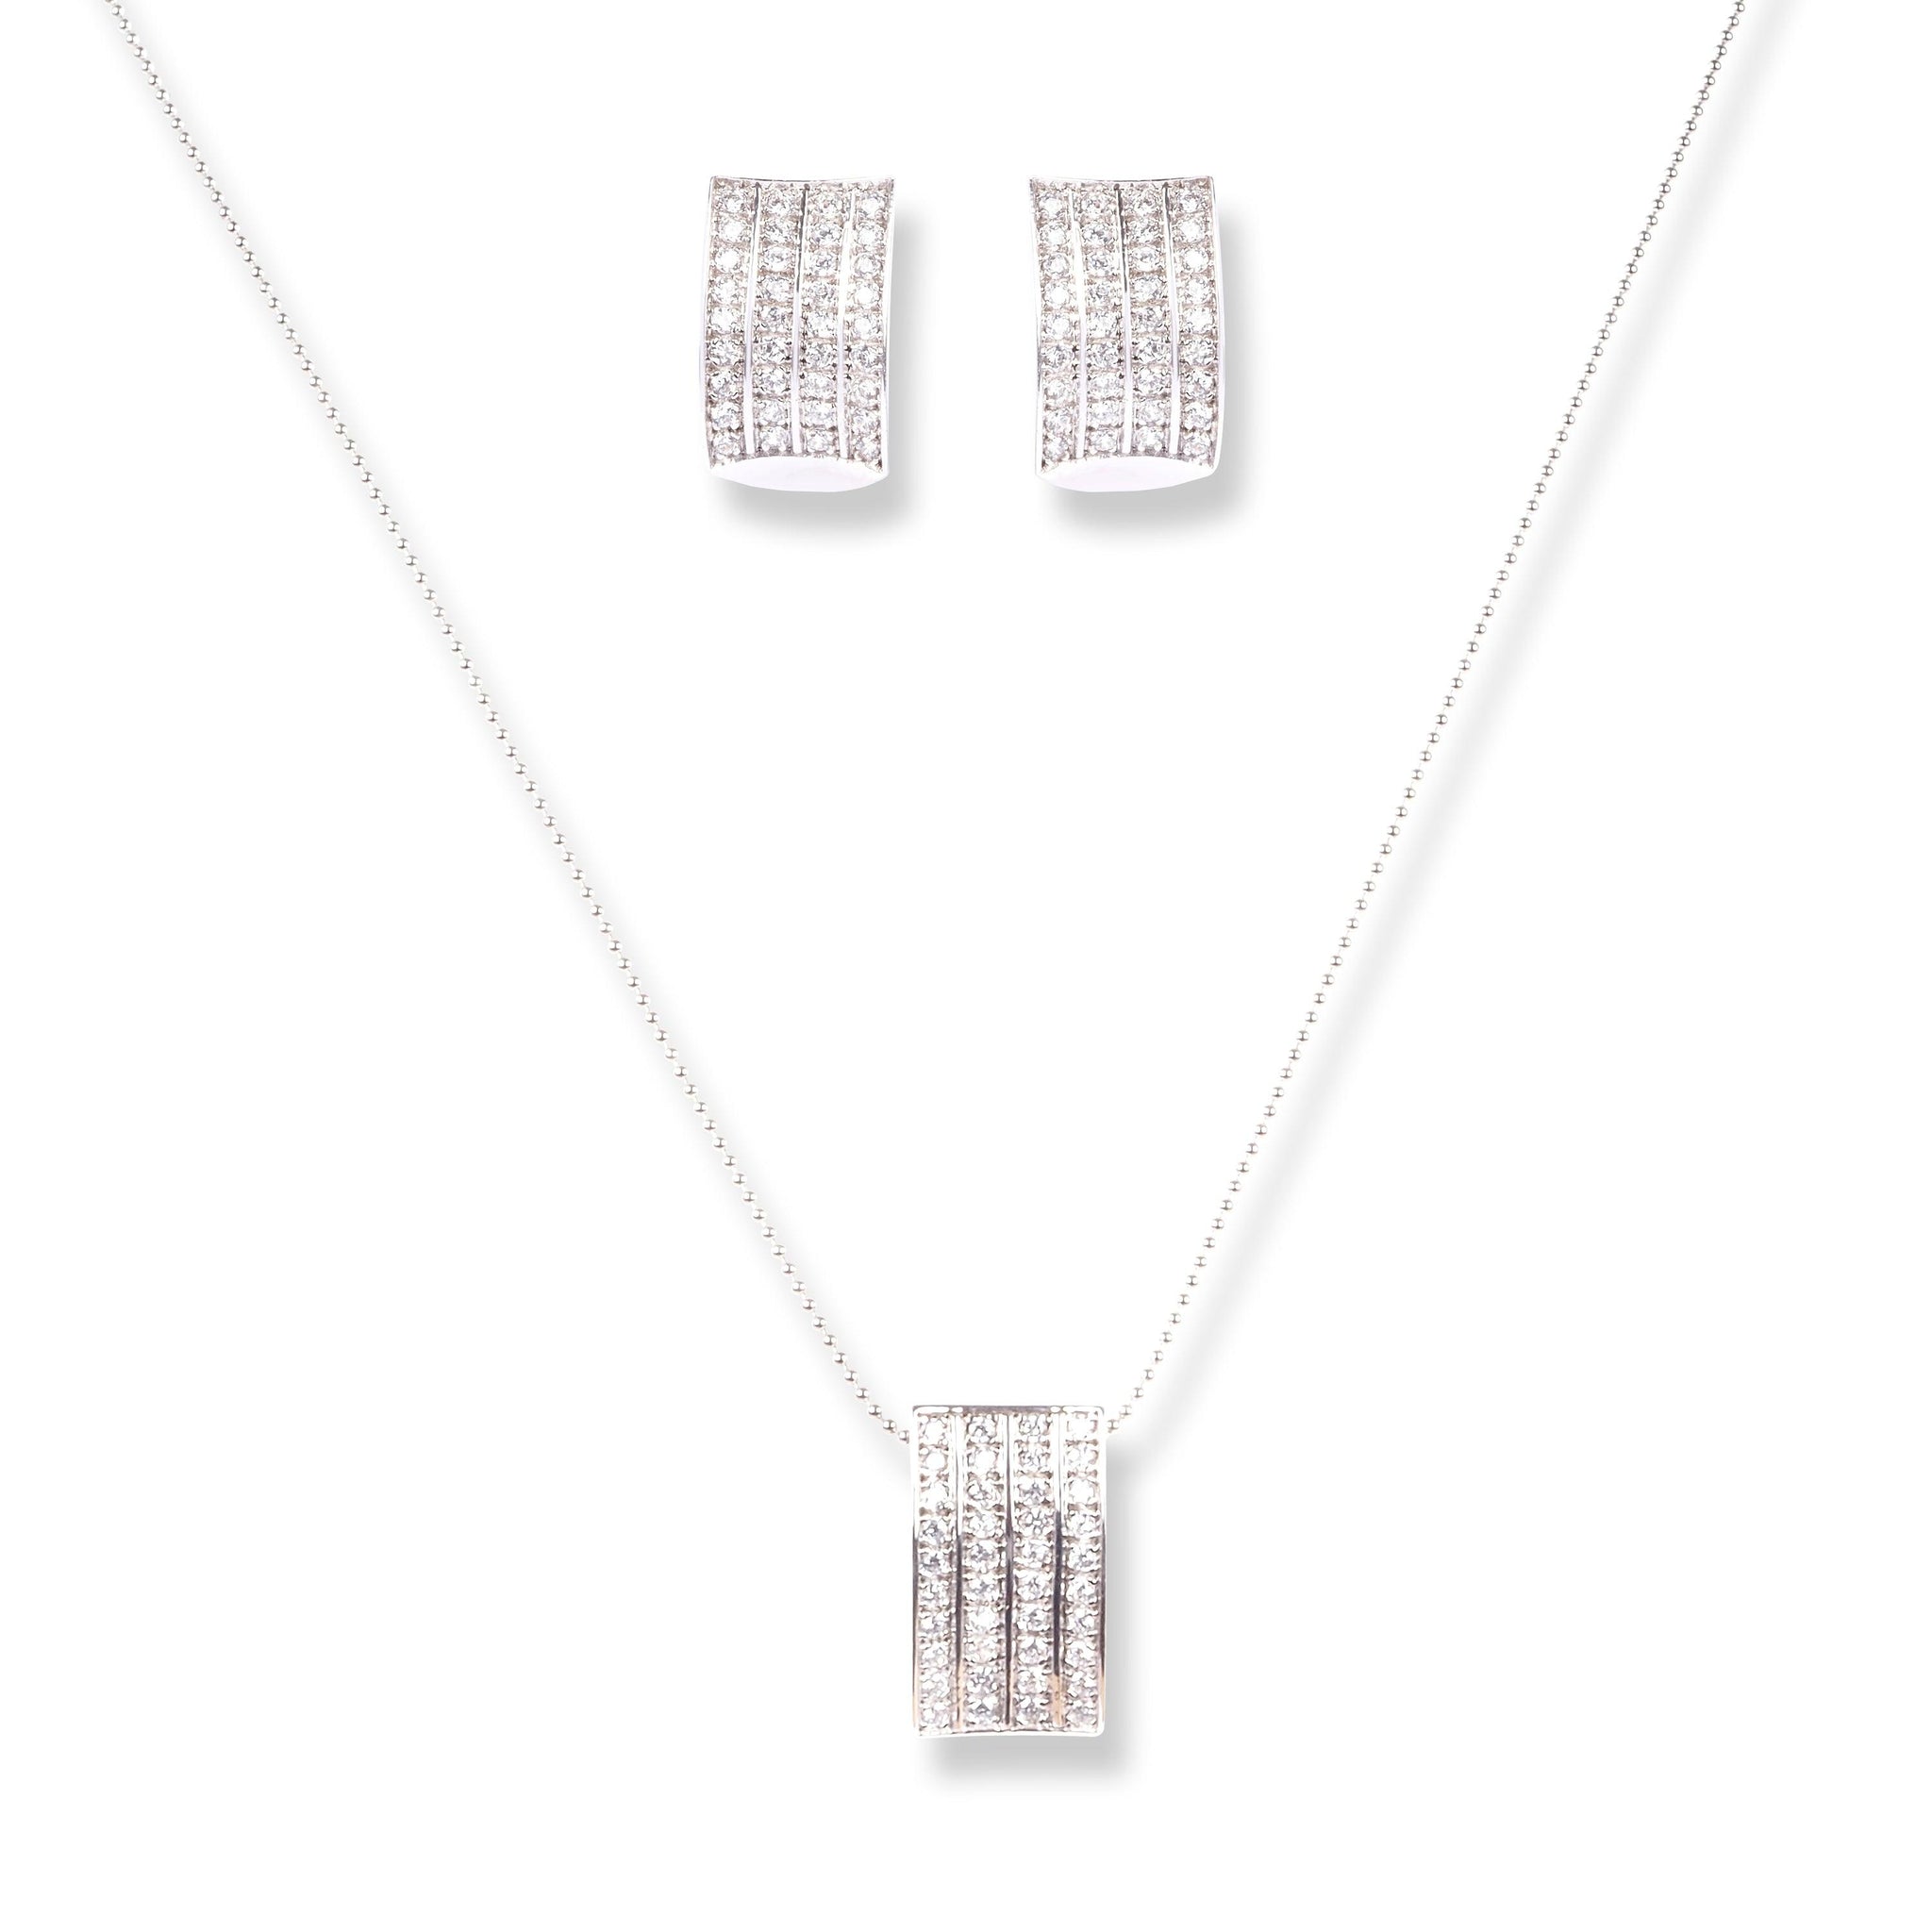 18ct White Gold Set with Cubic Zirconia Stones (Pendant + Chain + Hoop Earrings)